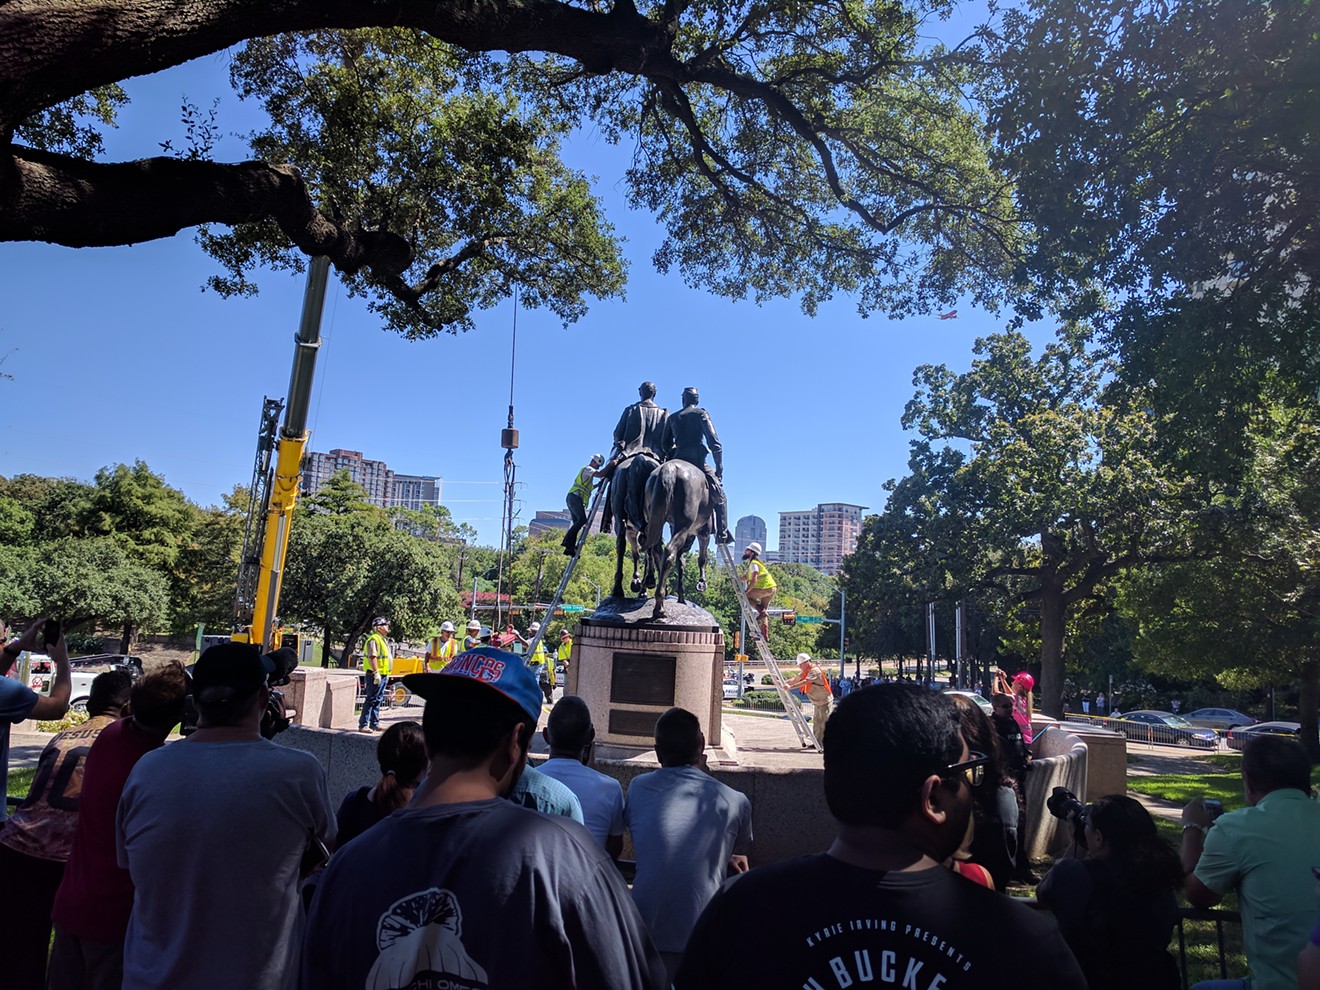 Onlookers watch as workers attach a crane to the Robert E. Lee statue in Lee Park, now called Oak Lawn Park.